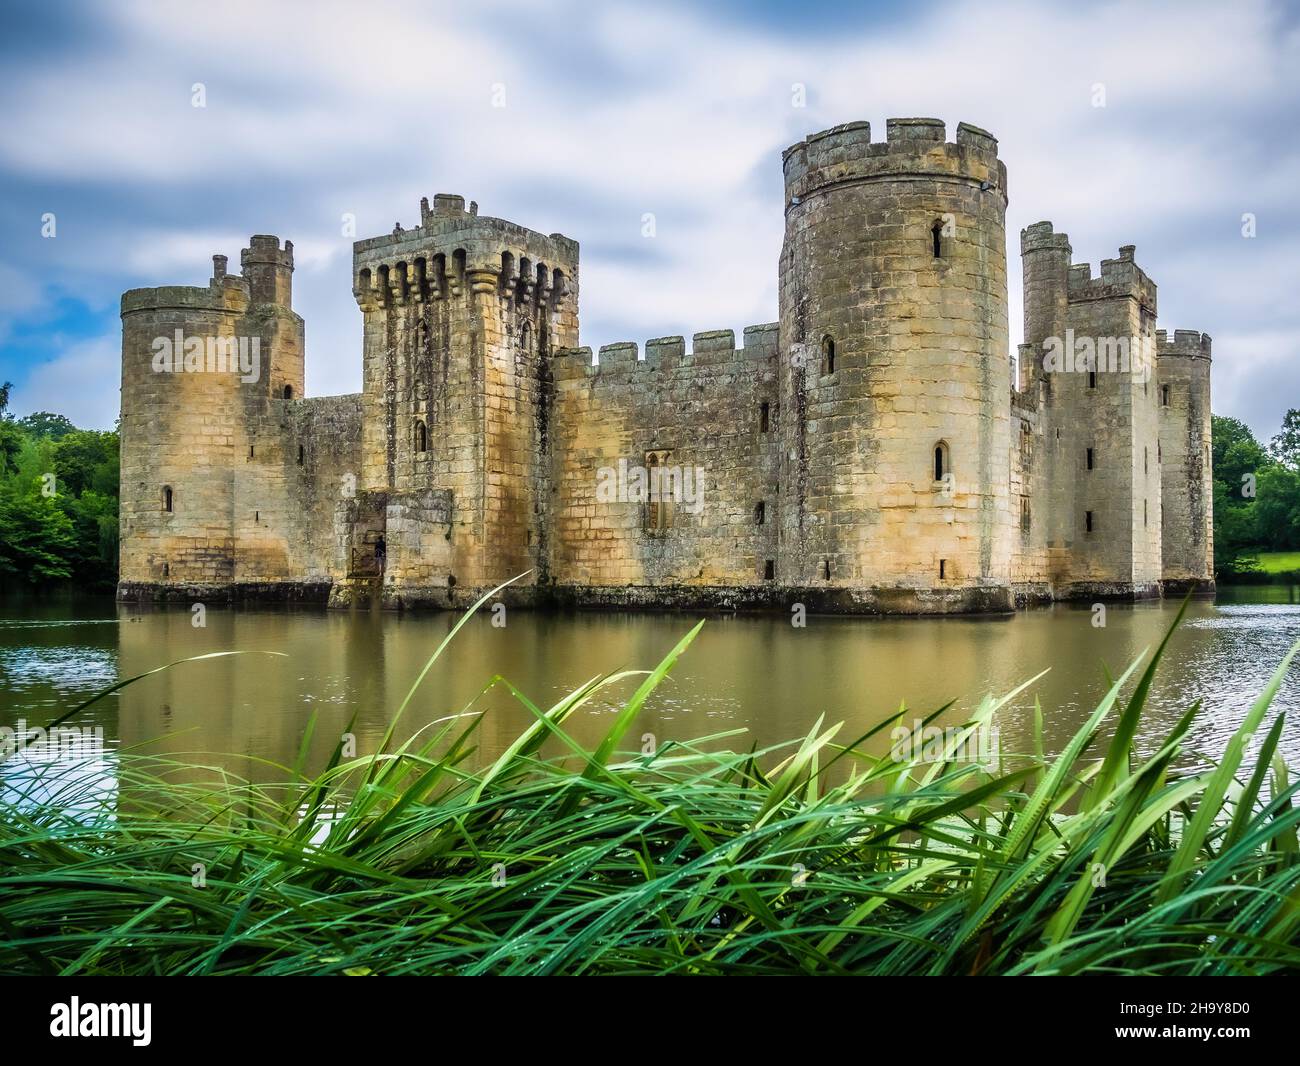 Medieval architecture 14th century Bodiam moated Castle with reeds in the foreground taken at Robertsbridge East Sussex on the 5th of July 2015 Stock Photo